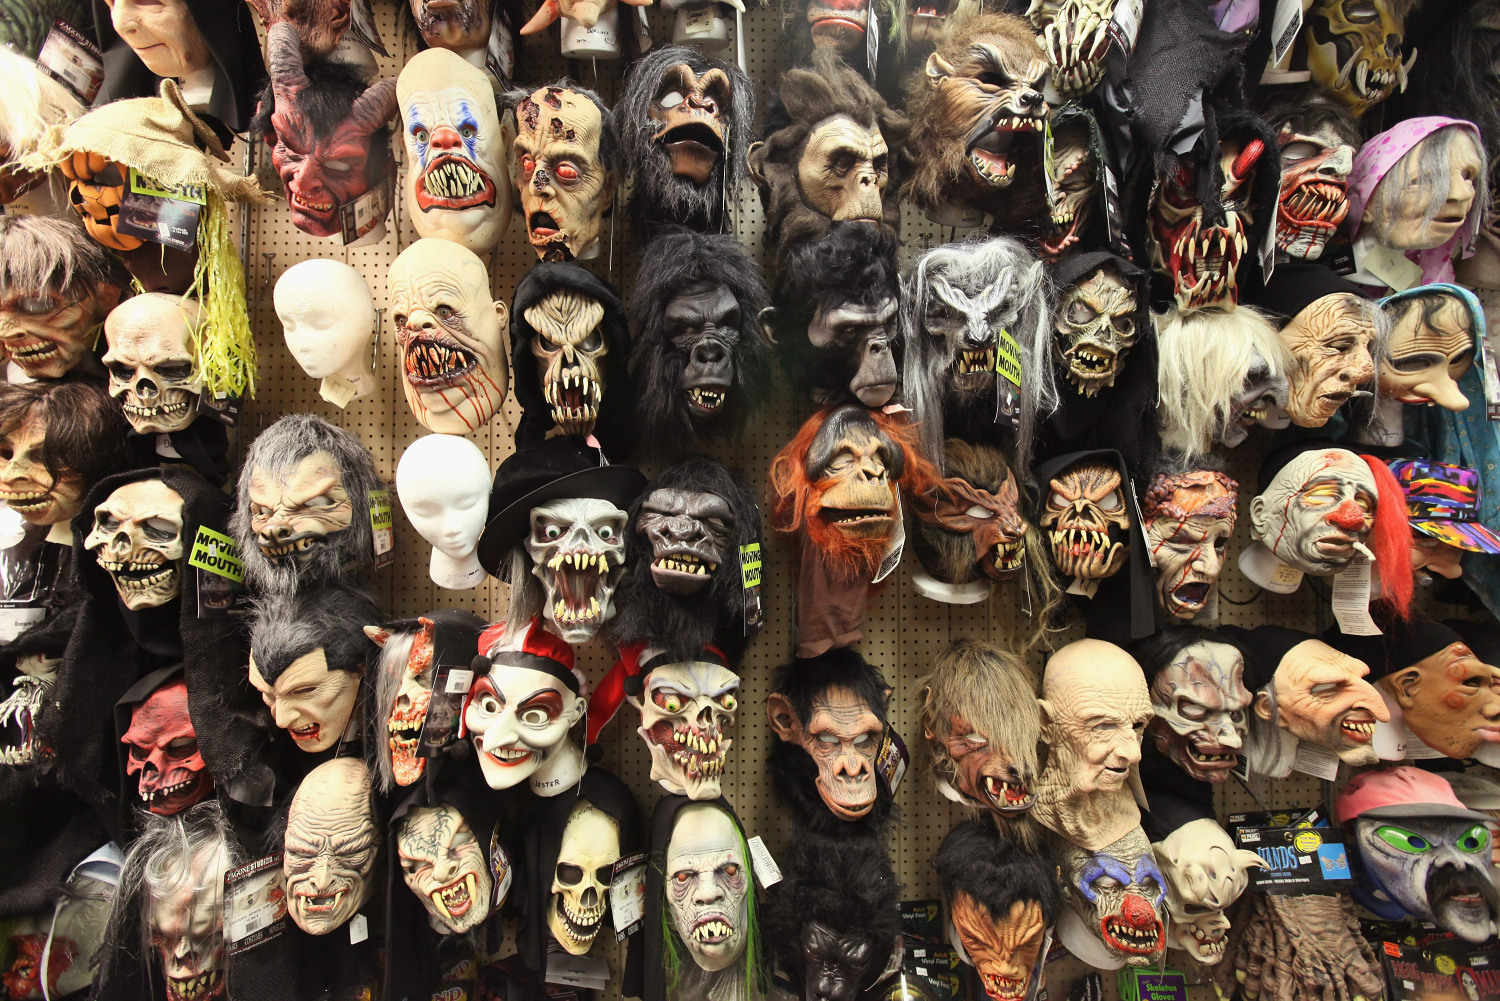 CHICAGO, IL - OCTOBER 28: Halloween masks are offered for sale at Fantasy Costumes on October 28, 2011 in Chicago, Illinois. The store, which had long lines at the registers at 4 AM this morning, is open around the clock through Halloween to help keep up with customer demand. Retailers nationwide are expecting record sales for Halloween merchandise this year with shoppers spending close to $7 billion dollars to celebrate the holiday. (Photo by Scott Olson/Getty Images)